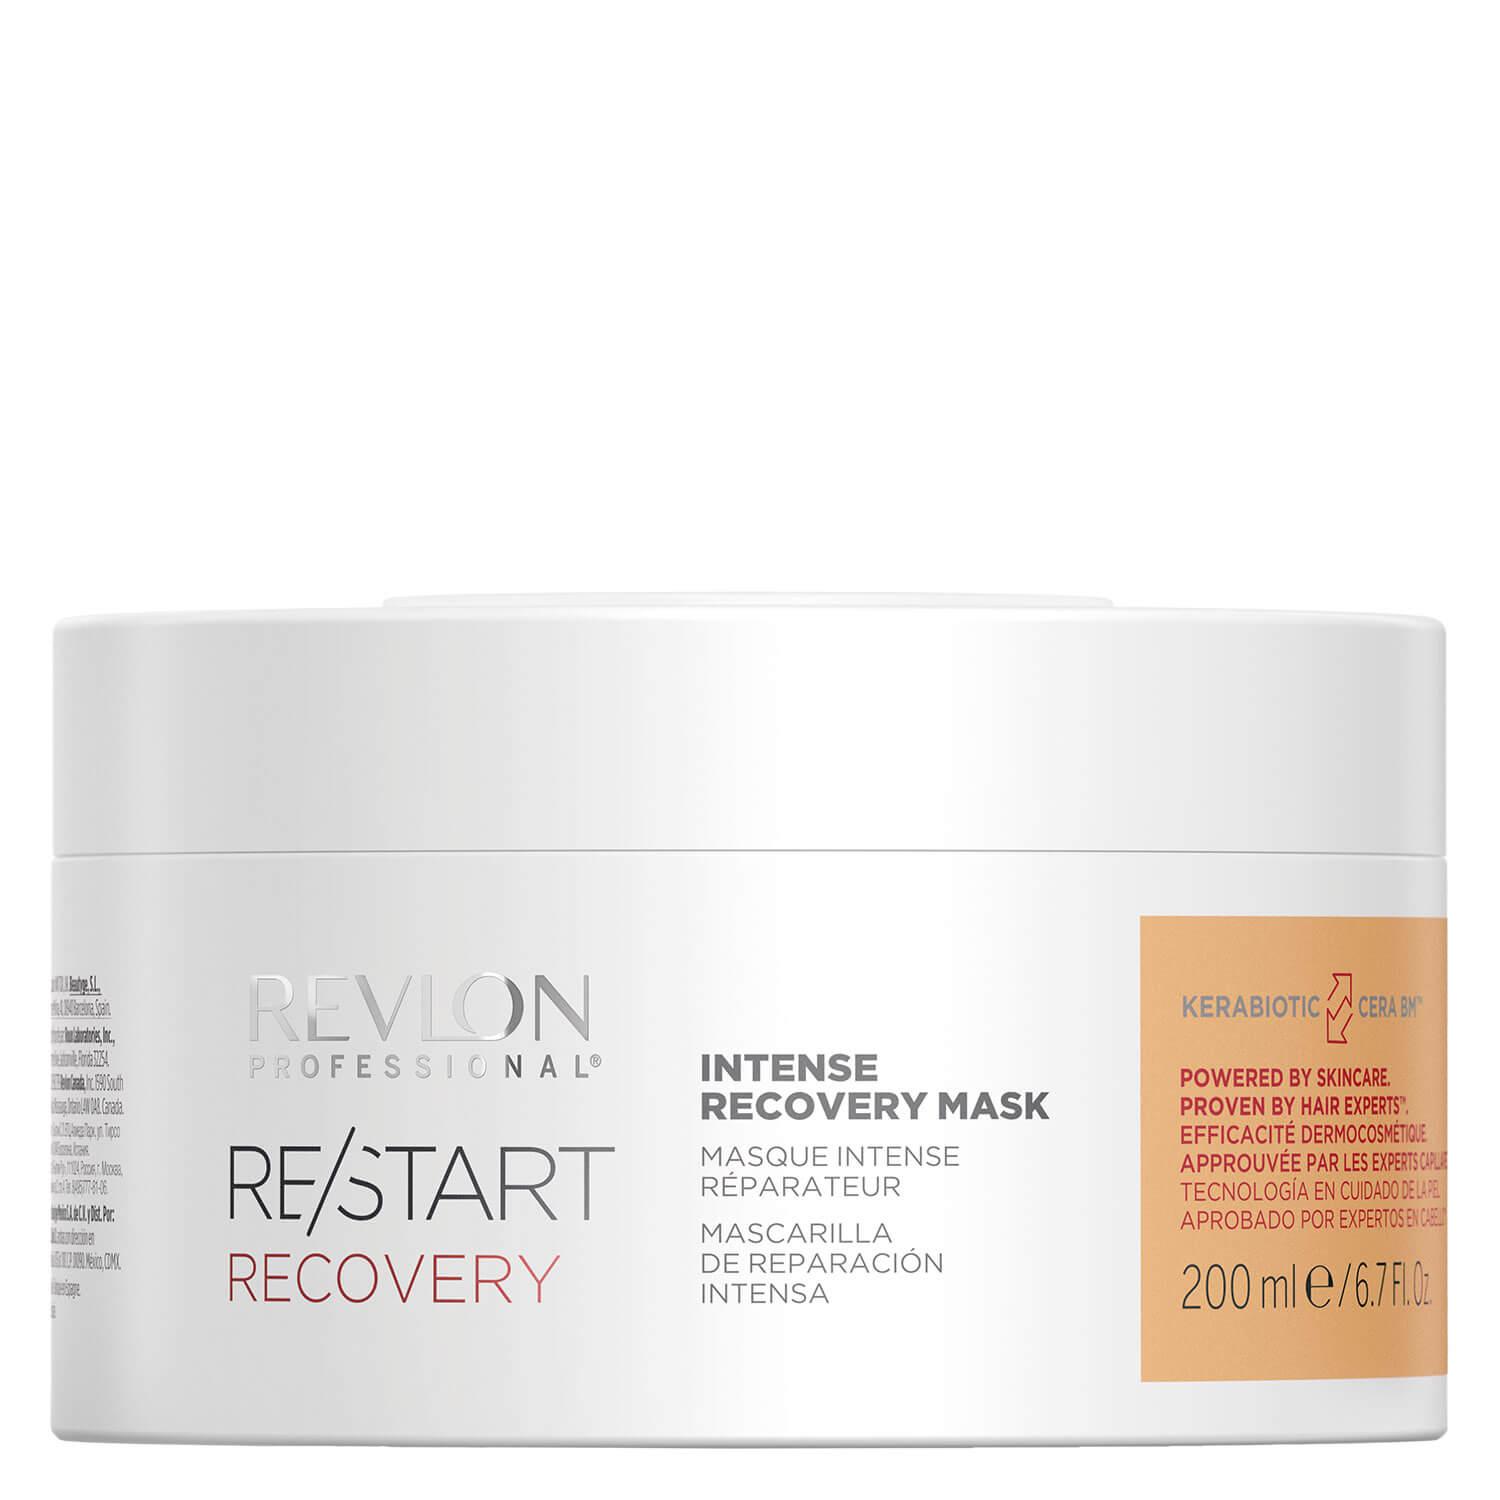 RE/START RECOVERY - Intense Recovery Mask